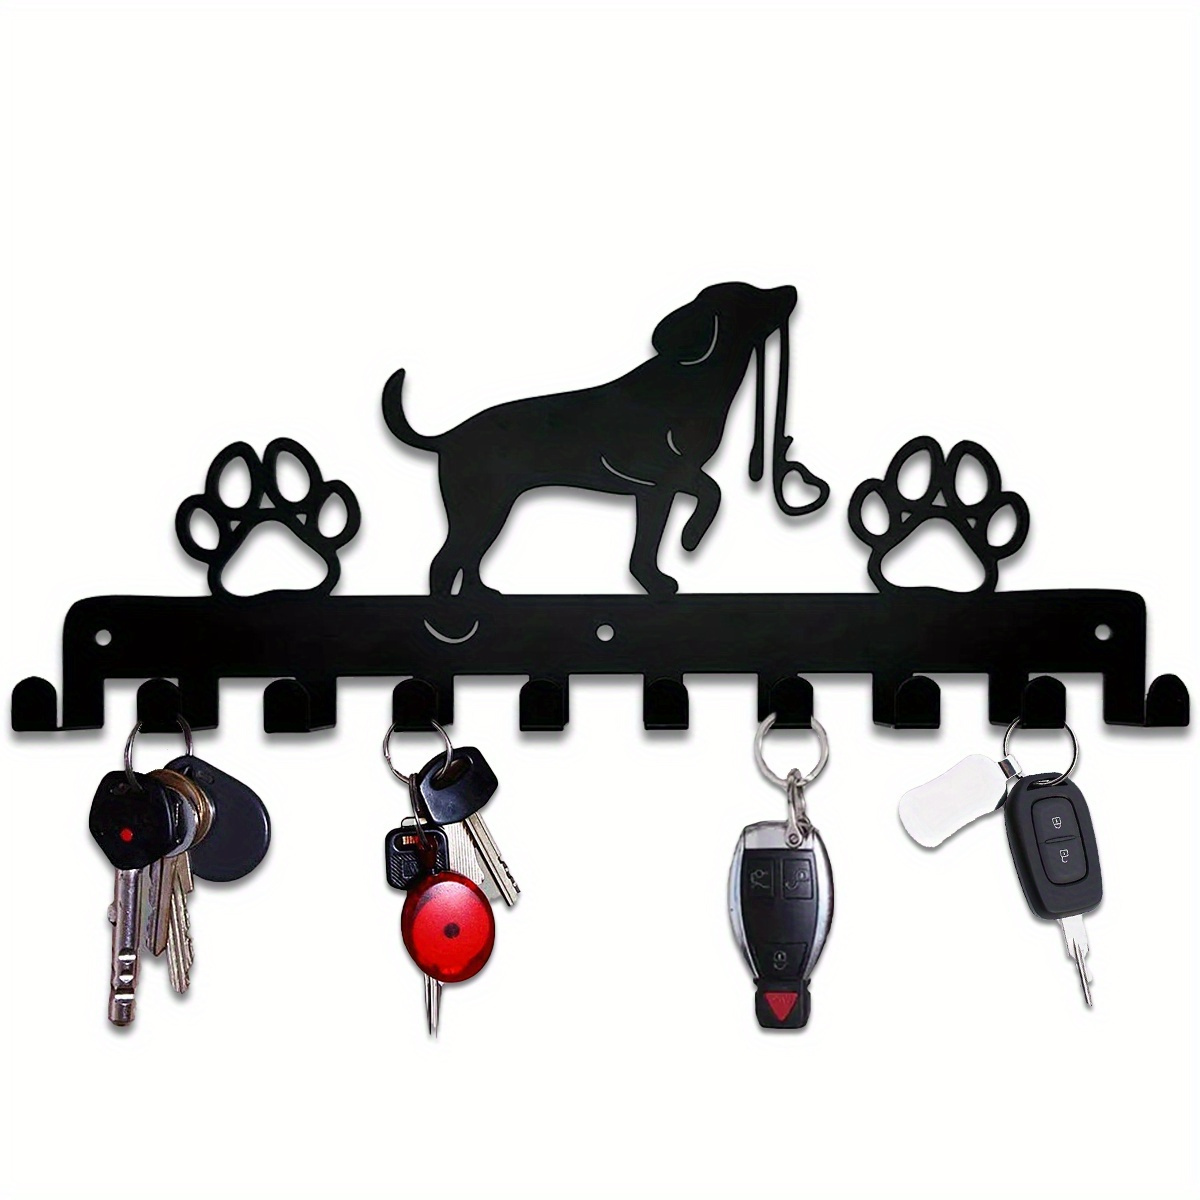 1PC Cute Dog Metal Wall Hanging Storage Rack With Hooks, Durable Coat  Holder For Keys, Hats, Home Decor, Hat Rack, Household Space Saving Storage  Orga